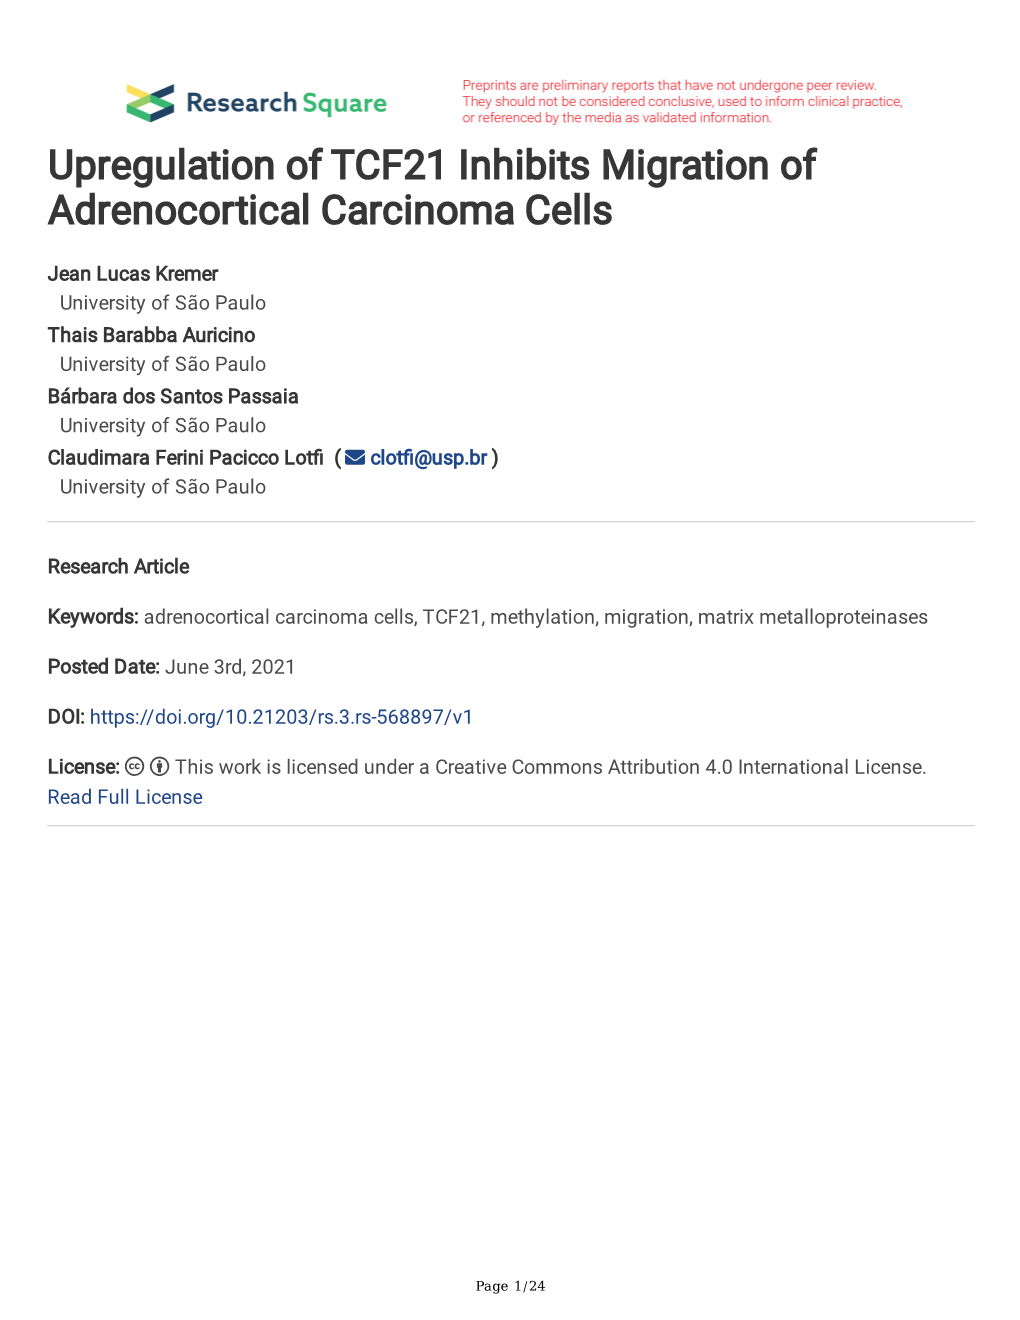 Upregulation of TCF21 Inhibits Migration of Adrenocortical Carcinoma Cells